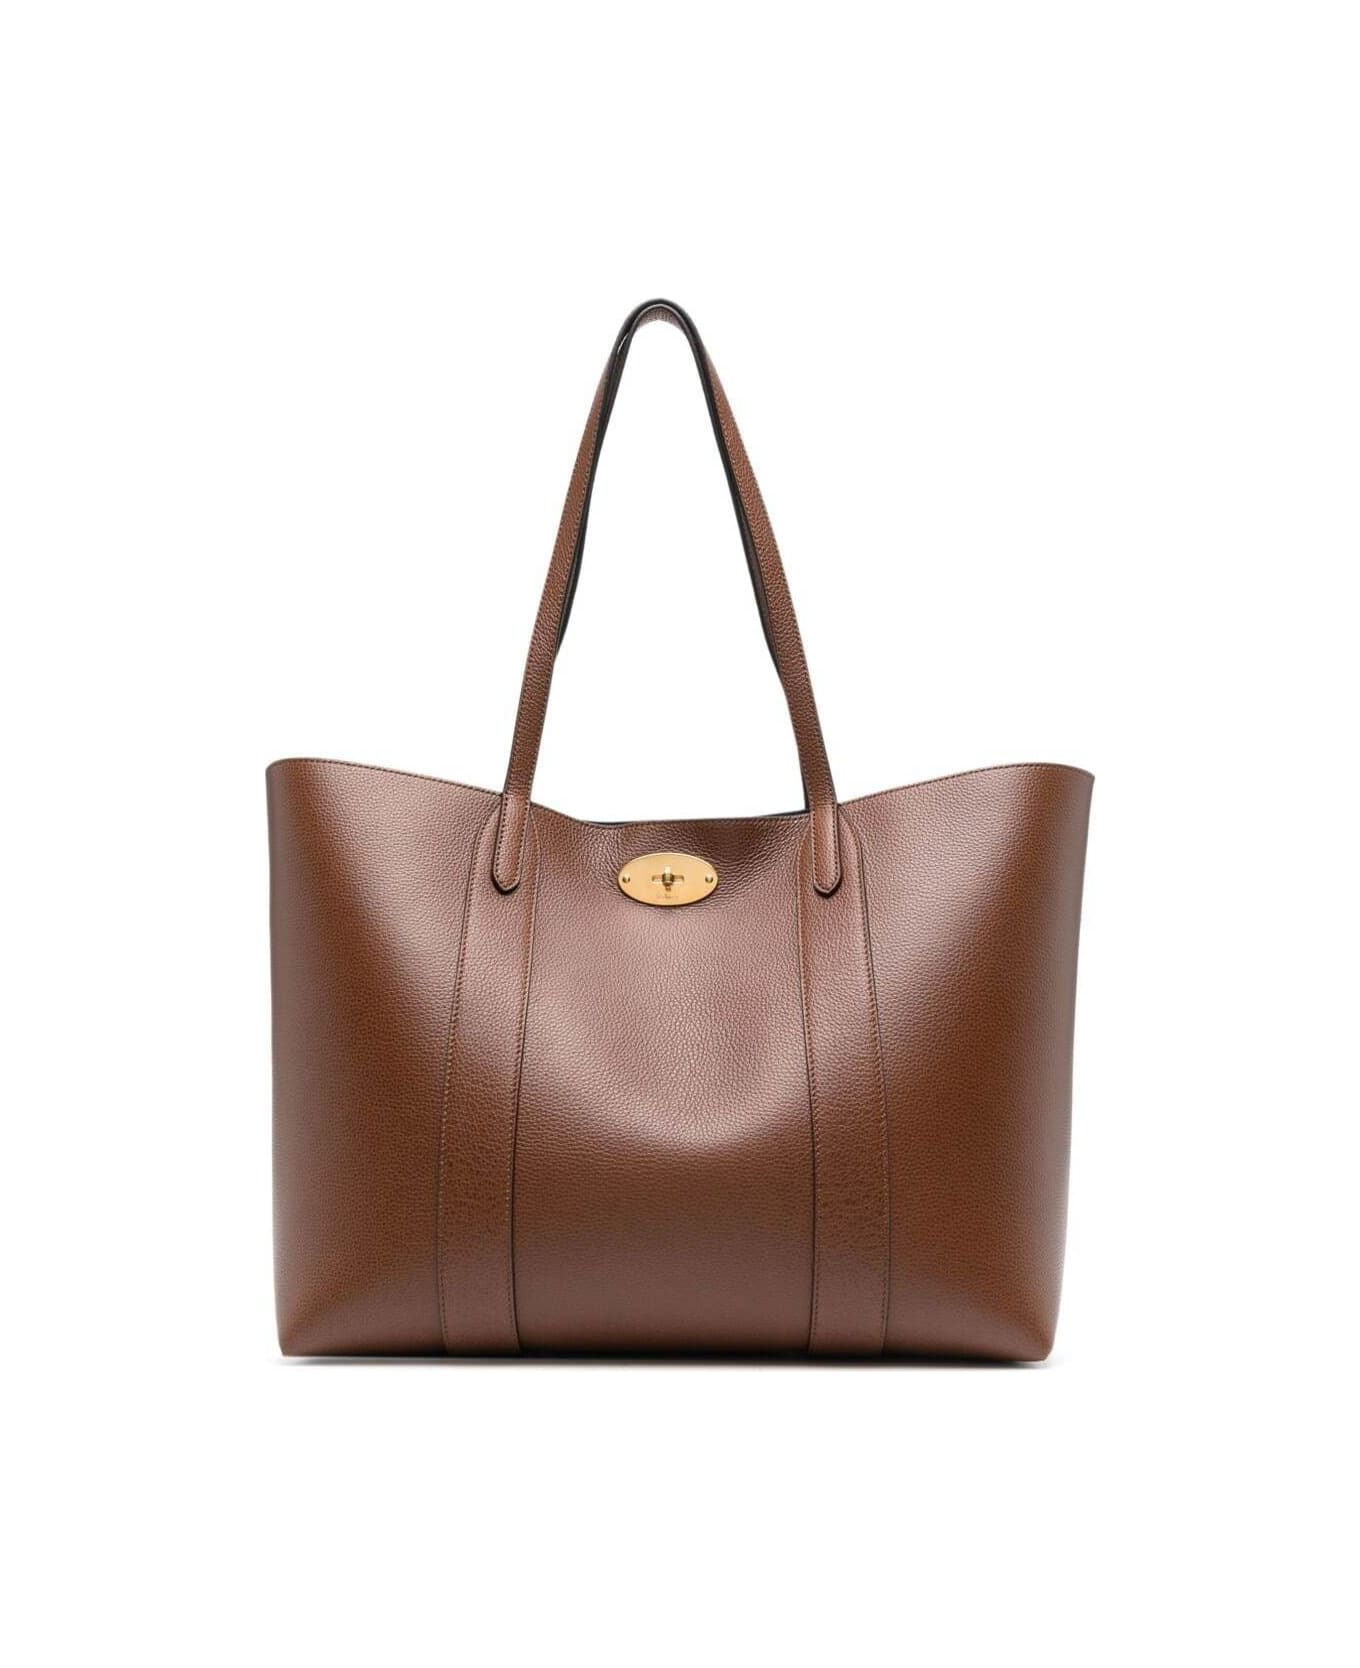 Mulberry Brown 'bayswater' Hand Bag With Flap Detail In Leather Woman - Brown トートバッグ